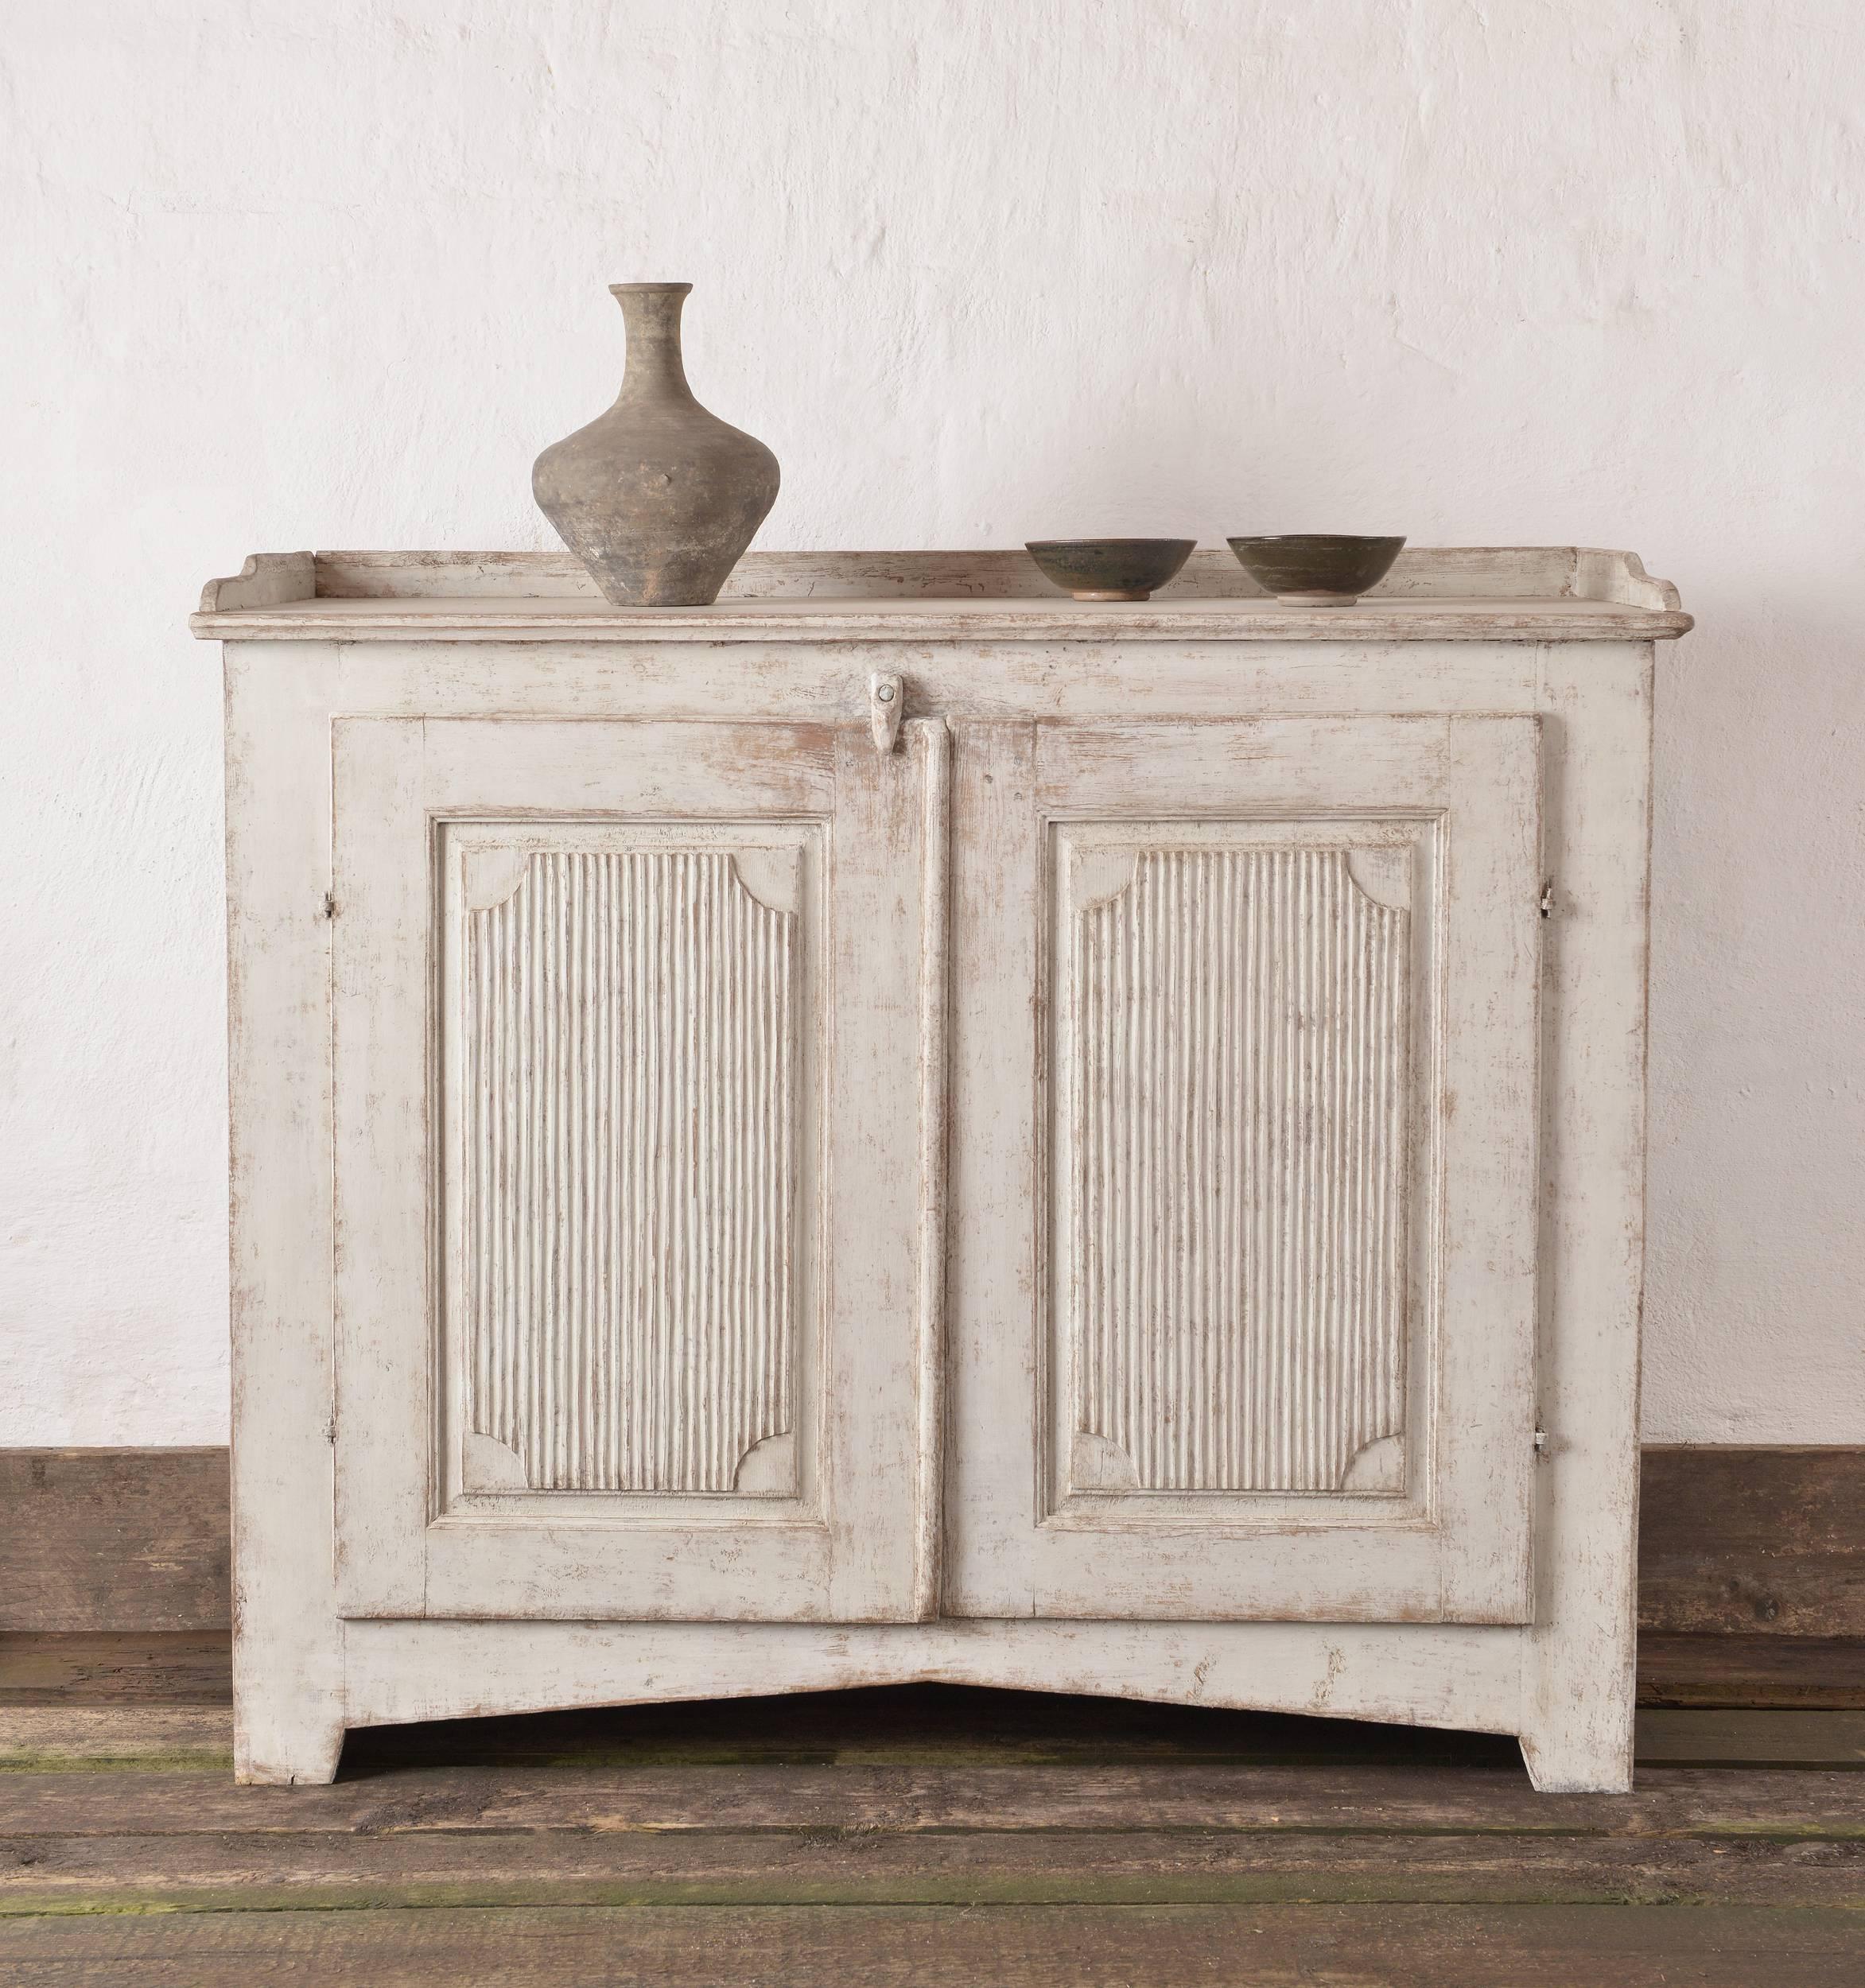 Elegant and simple Gustavian early 19th century sideboard. Great proportions, patina. Would work well if combined with modern design, but also at home in a more traditional setting.